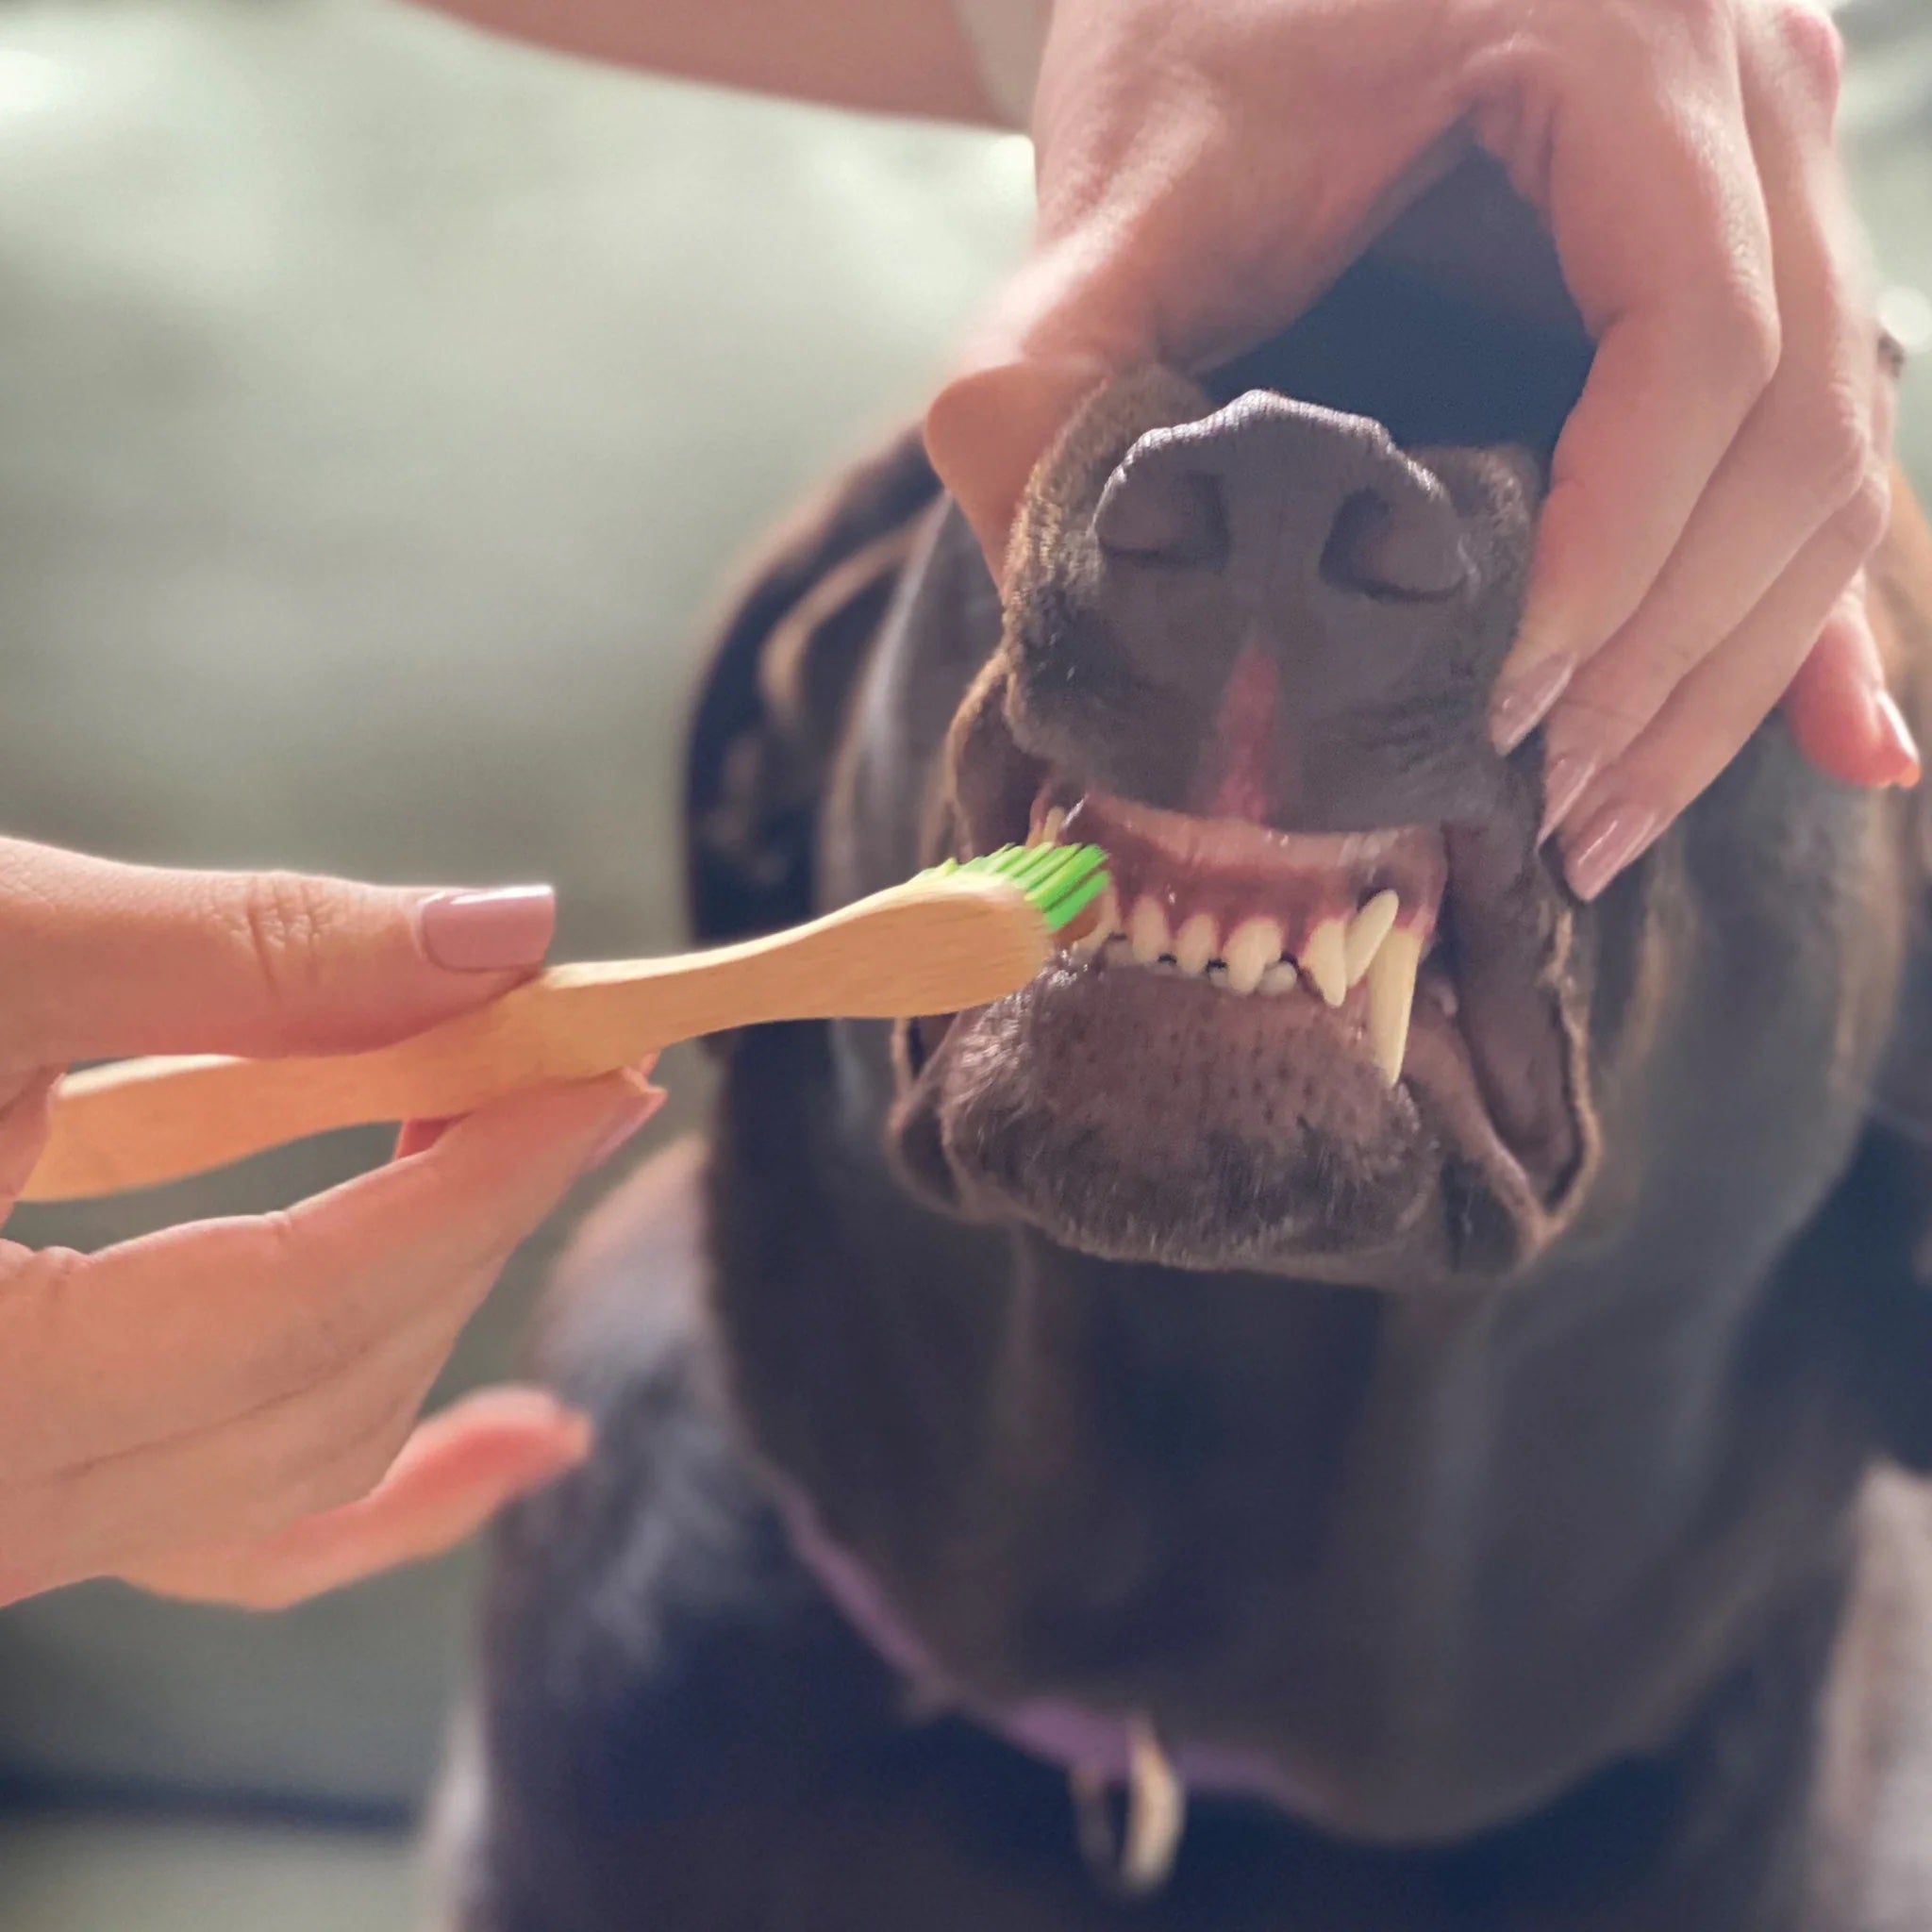 Pure and Natural Dog Organic Dental Solutions: Canine Tooth Gel with Eco-Friendly Bamboo Toothbrush